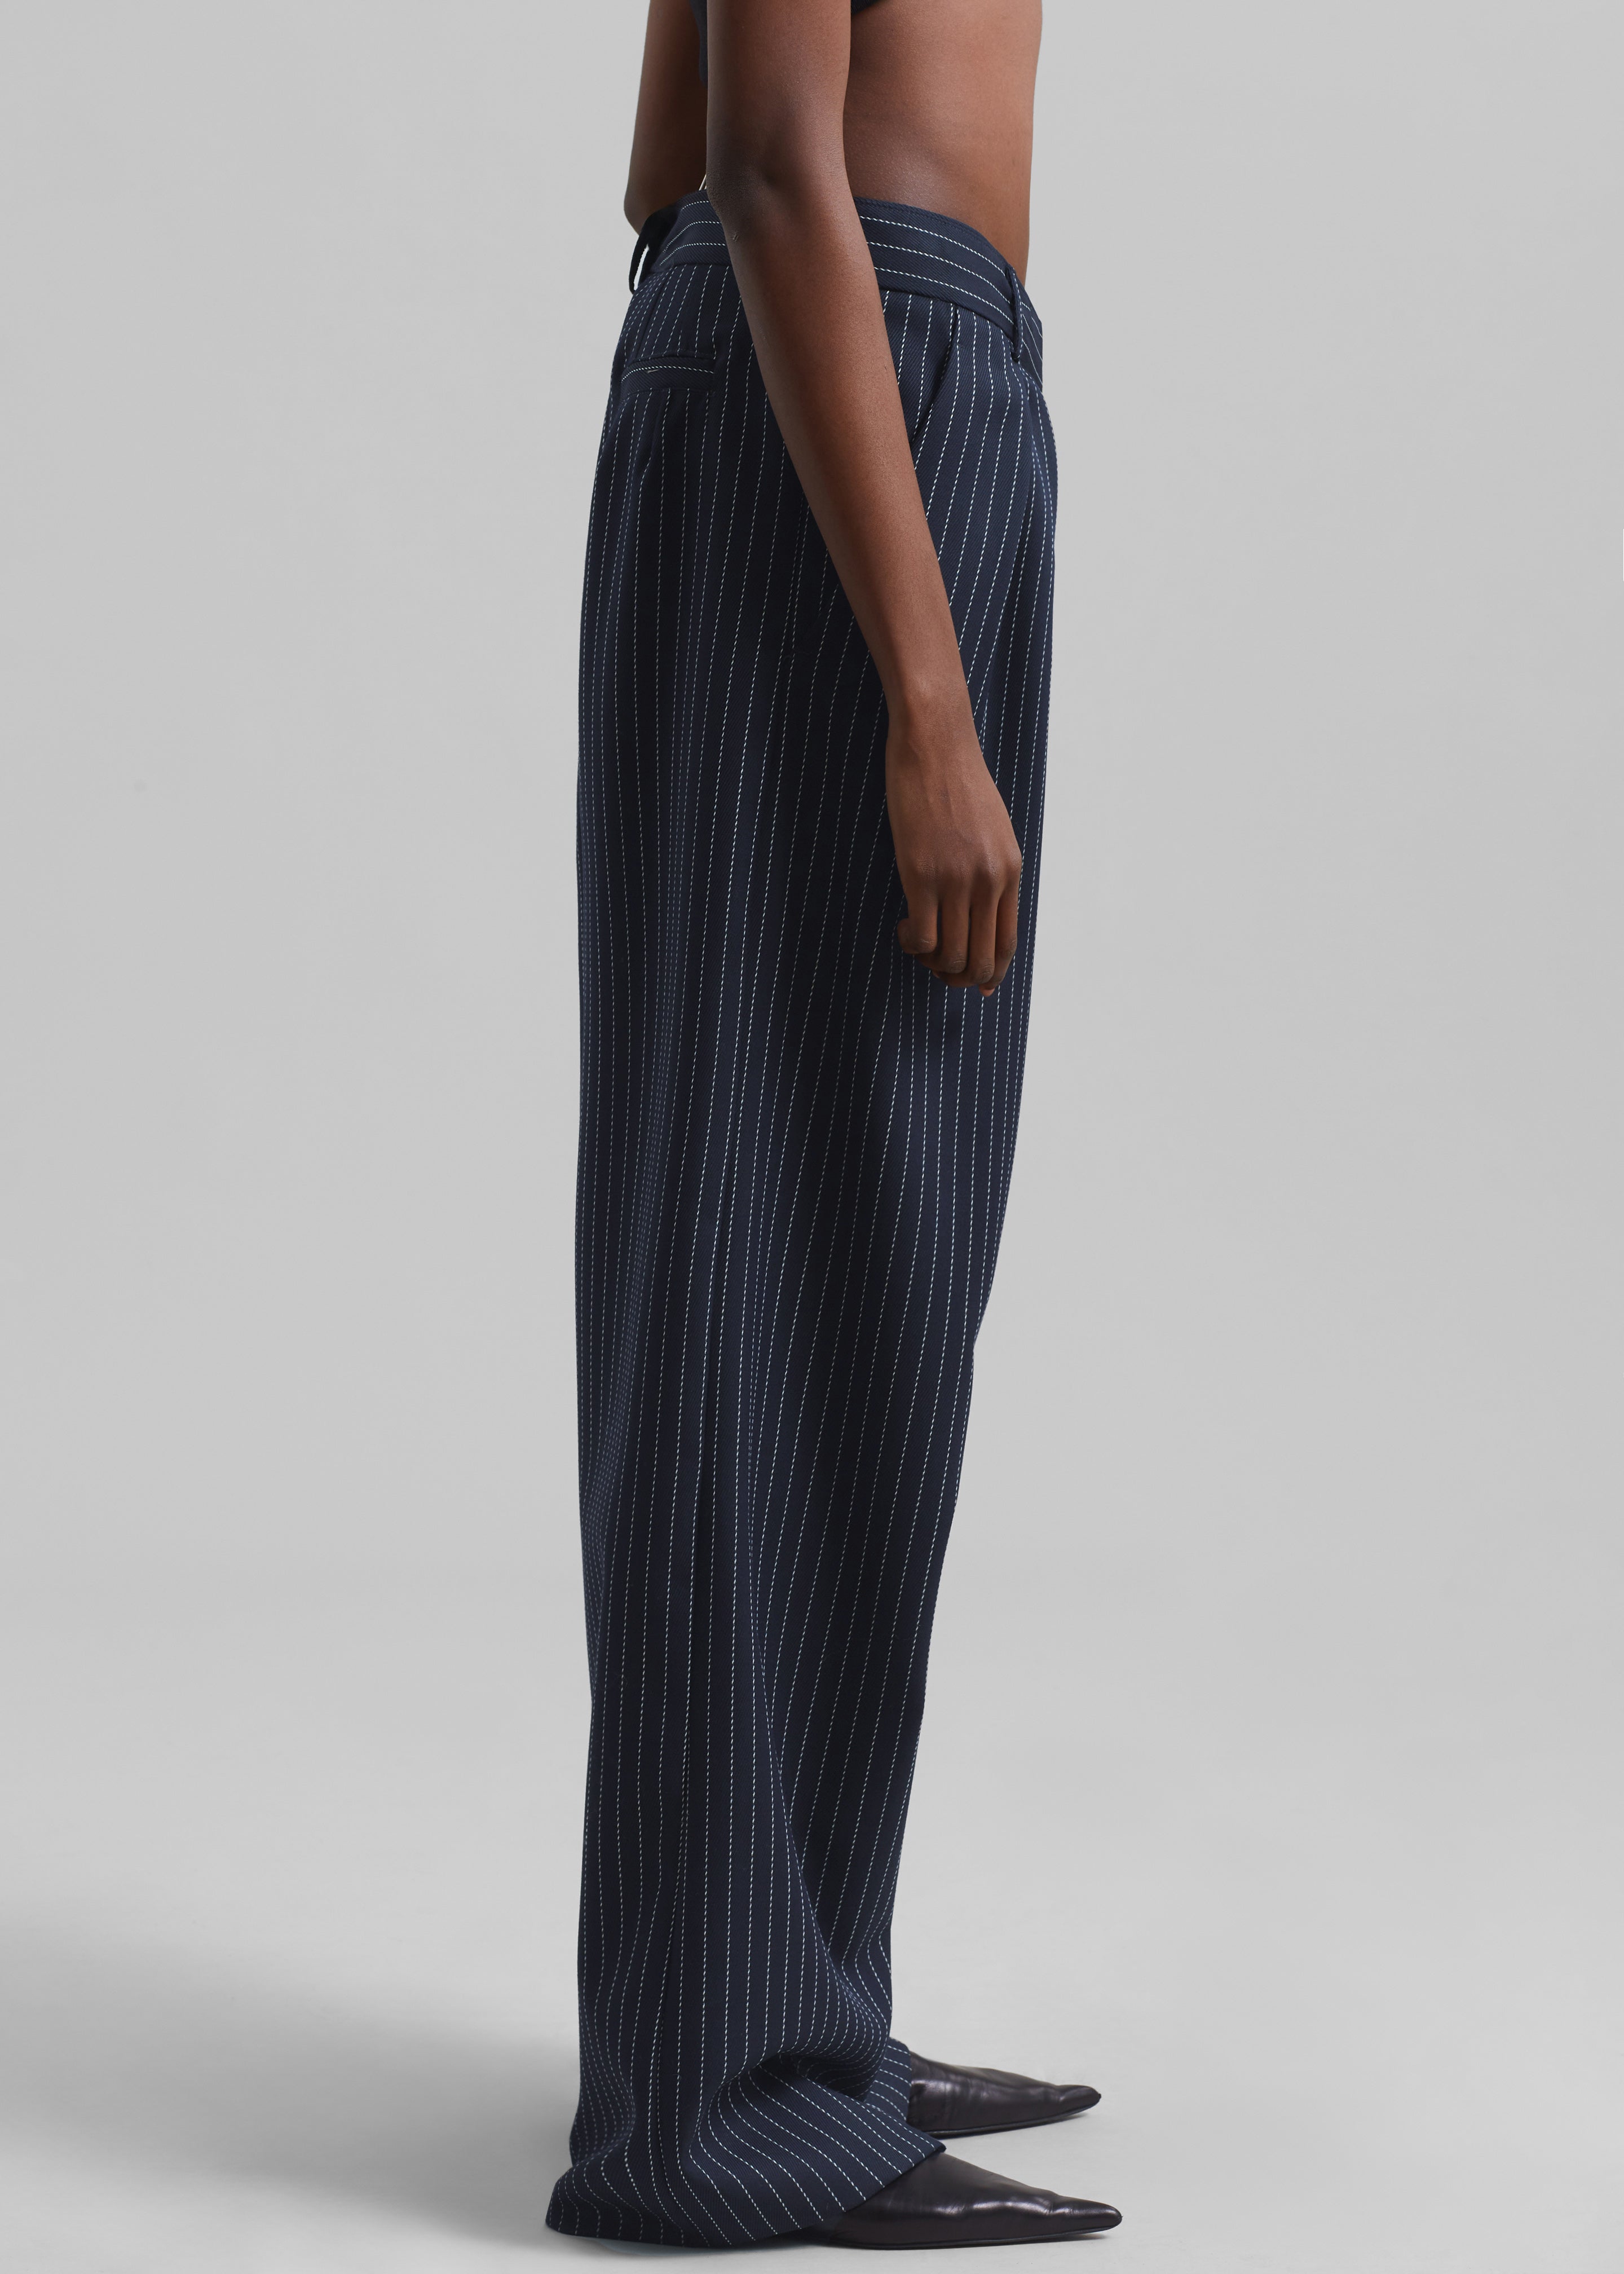 Ripley Pleated Twill Trousers - Navy/White Pinstripe - 5